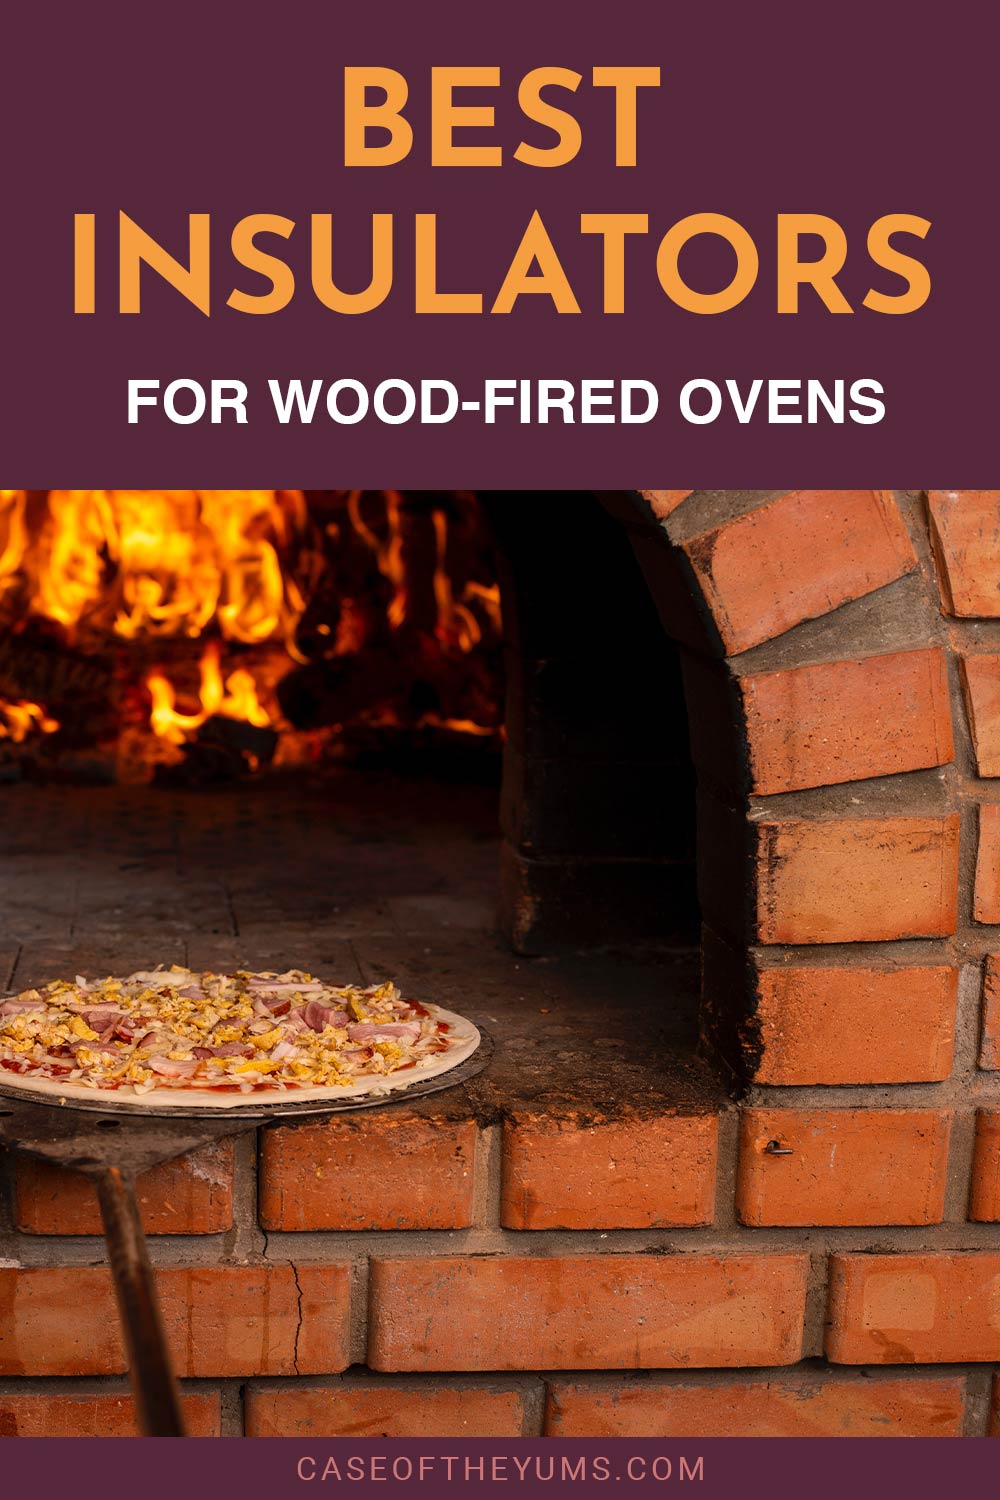 Putting pizza in a oven - Best Insulators for Wood-Fired Ovens.